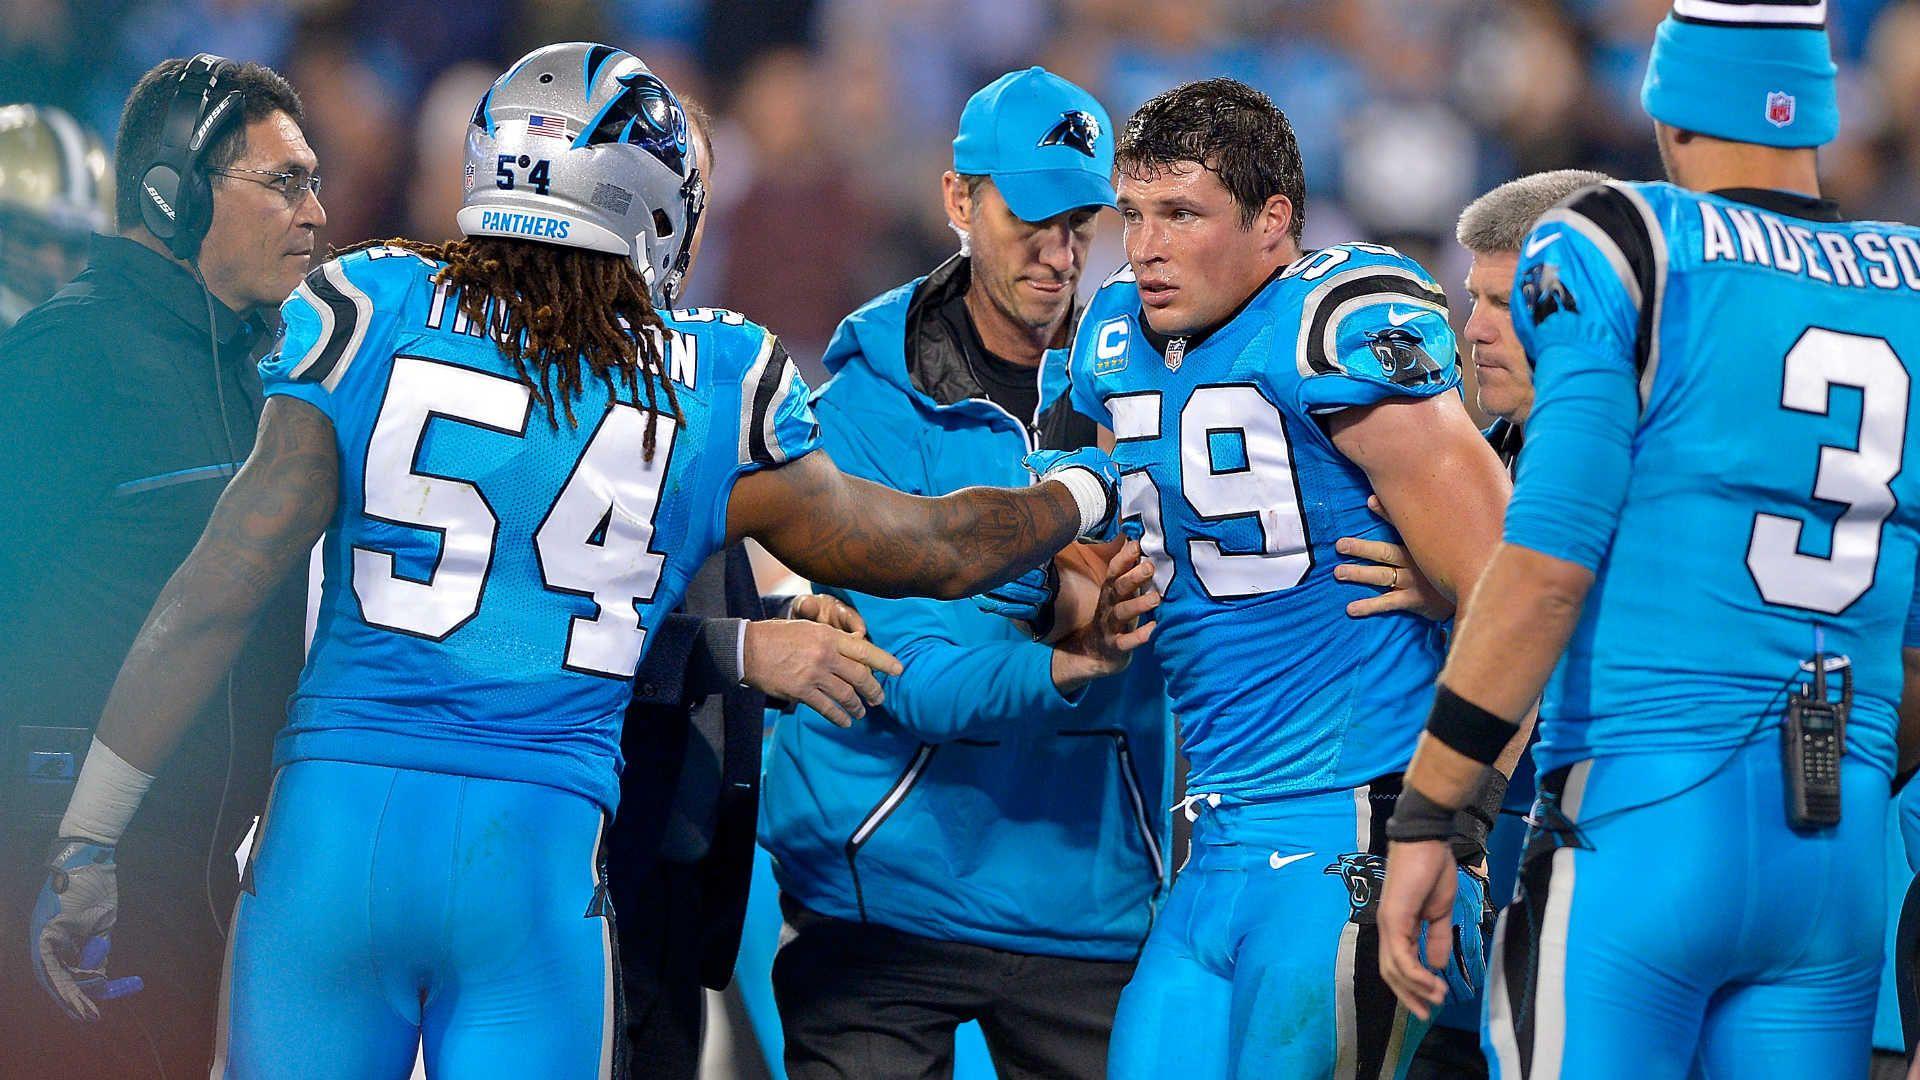 Panthers' Luke Kuechly dodged concussion vs. Eagles, report says